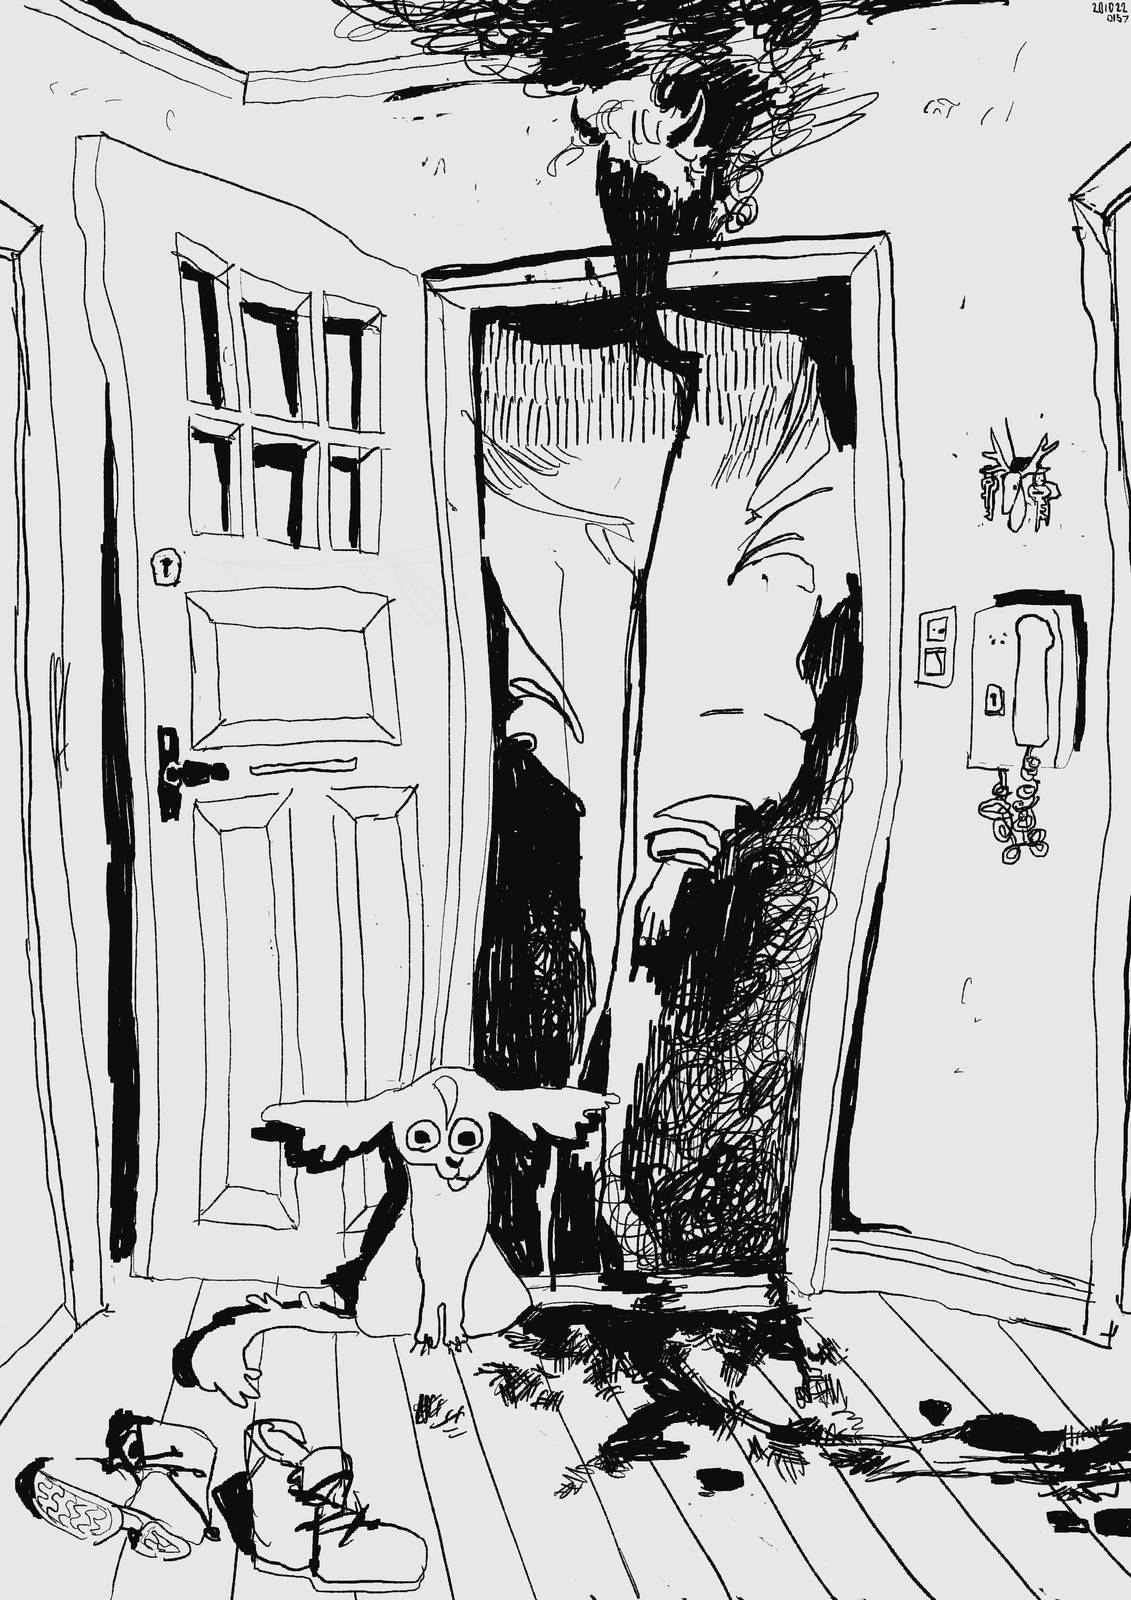 Black and white line drawing, showing a distorted entryway with an open door. Almost too big for the doorway, poking its head inside, is a fucked up bulky, lanky figure with no real face, two horns, and a silly little baby hand poking out from its suitlike clothes. In front of it, the dog, a cute and goofy little cavalier spaniel. The light is dramatic, eeire, and blood tracks lead from the door off to the right side, cut off by the edge of the picture.